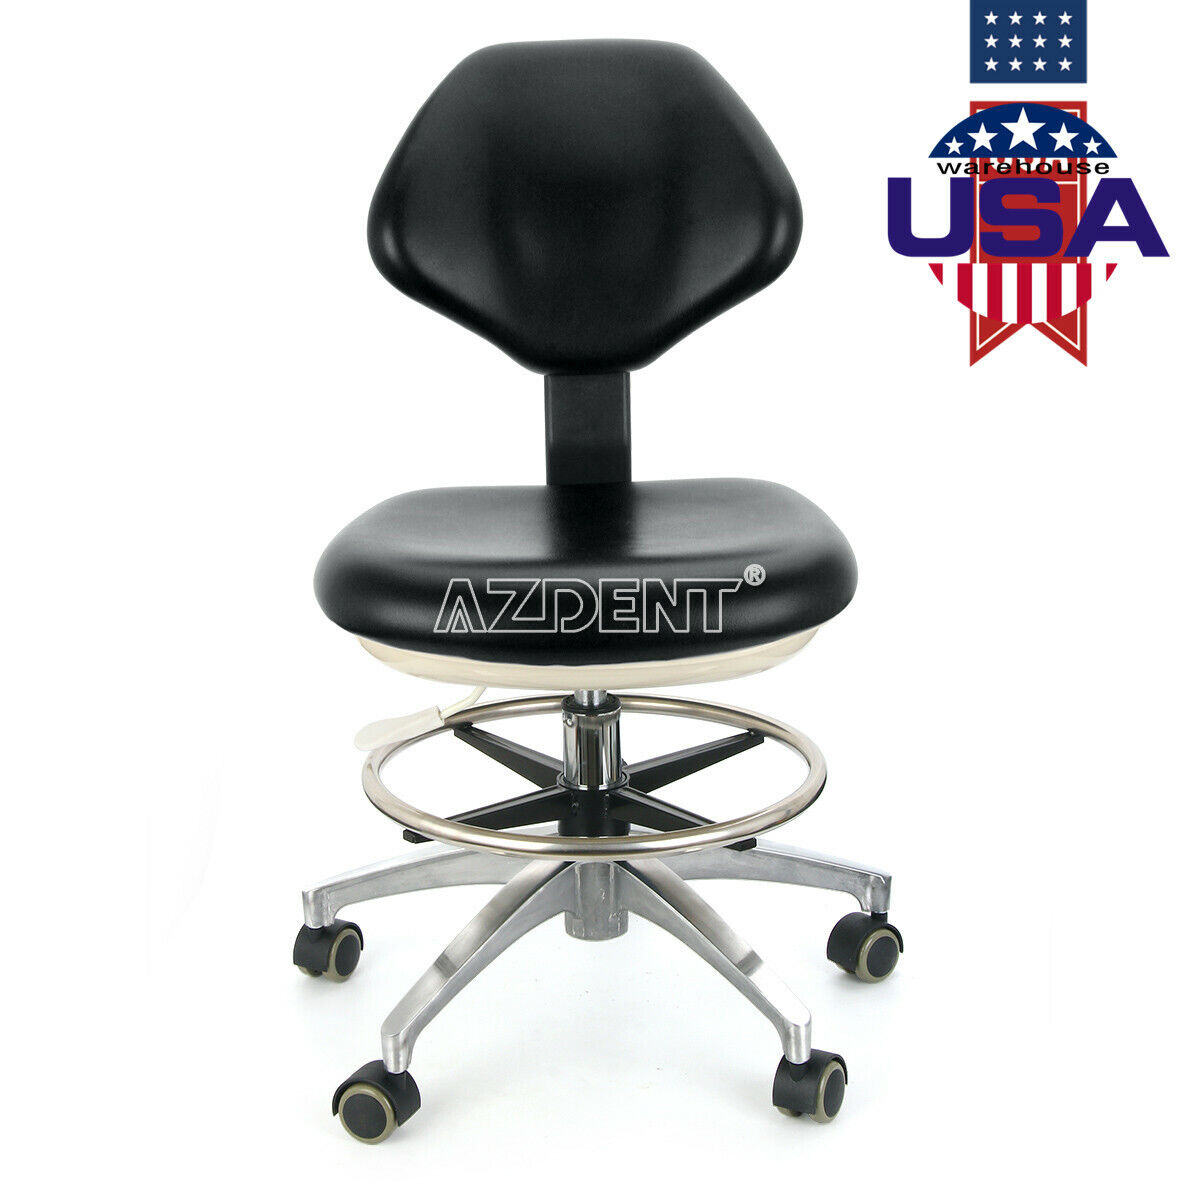 USA Dental Seasonal Wrap Introduction Doctor Assistant Stool Mobil Free Shipping New Adjustable With backrest